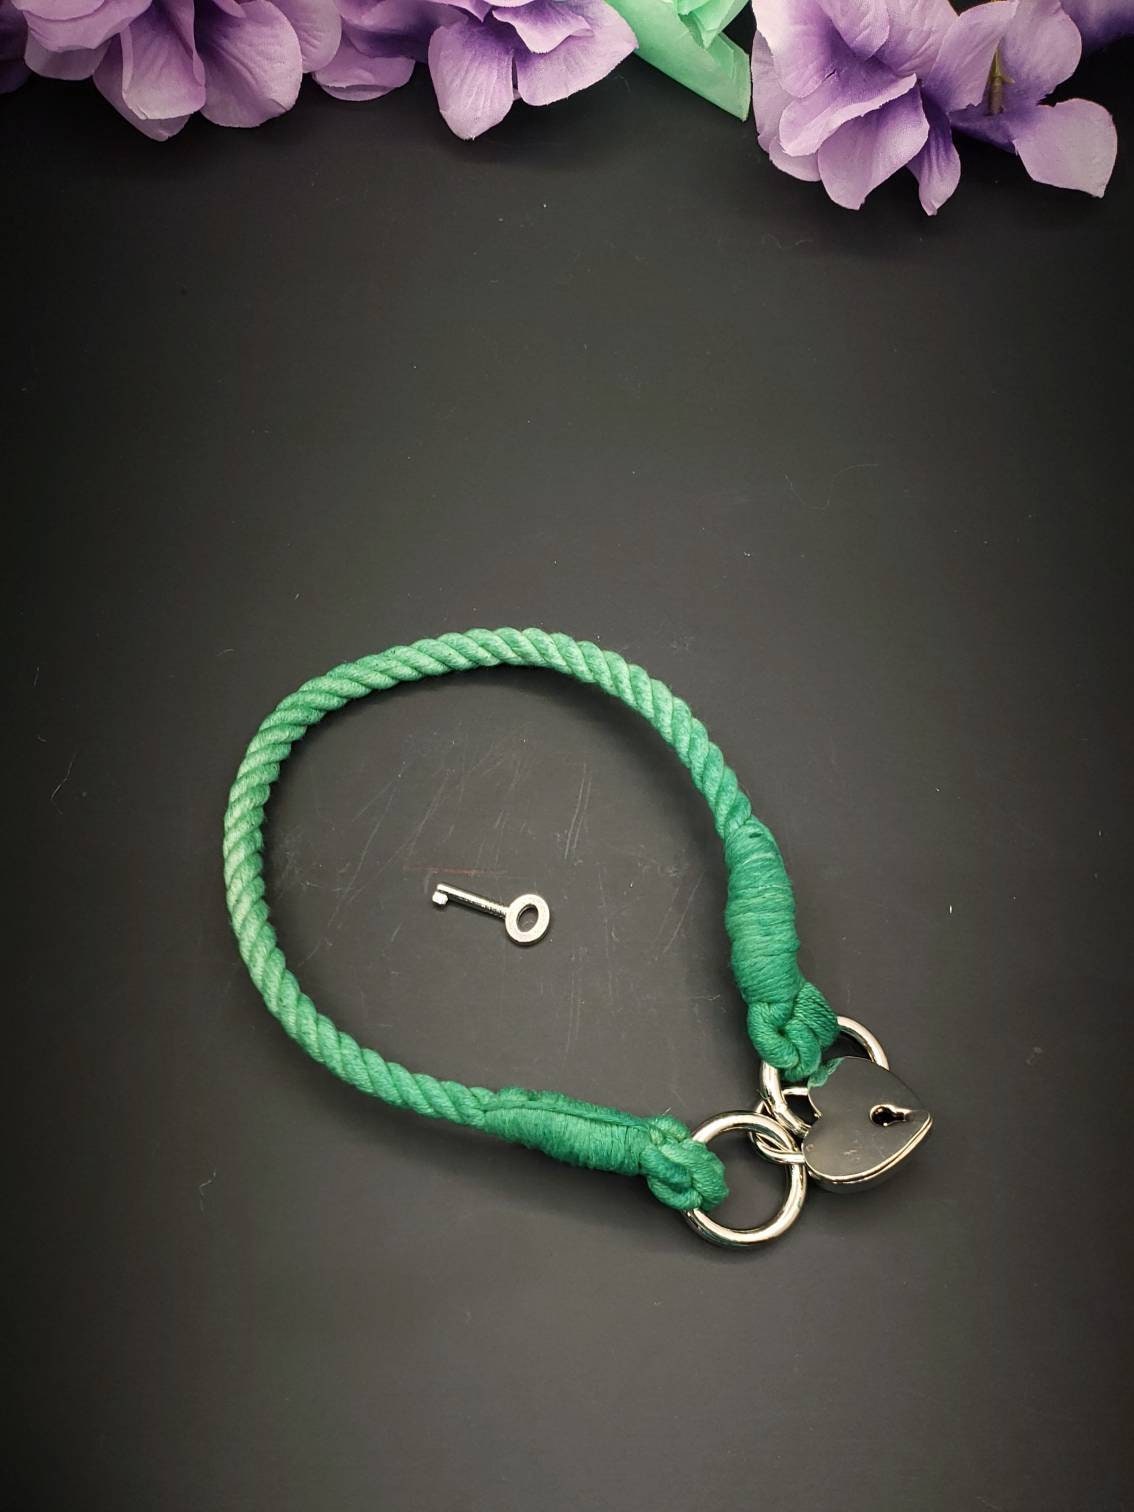 Forest Green Heart Locking Collar - BDSM Rope Choker - Submissive Cotton Collar | Novelty Choker Accessory for Roleplay